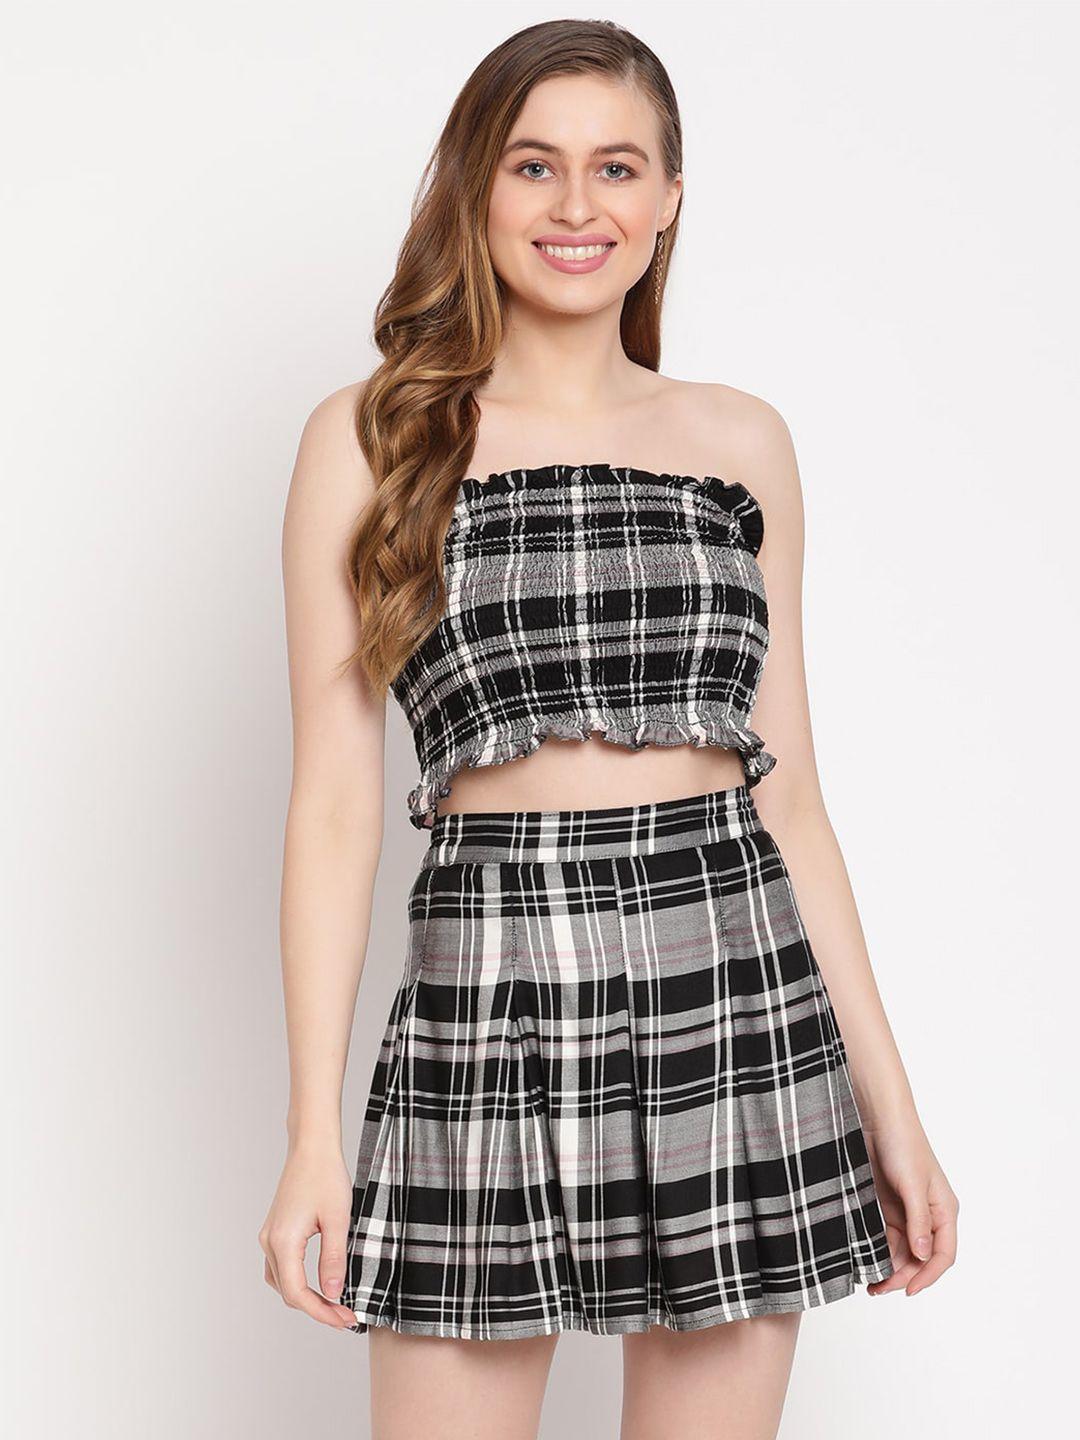 tag 7 black & white checked tube crop top